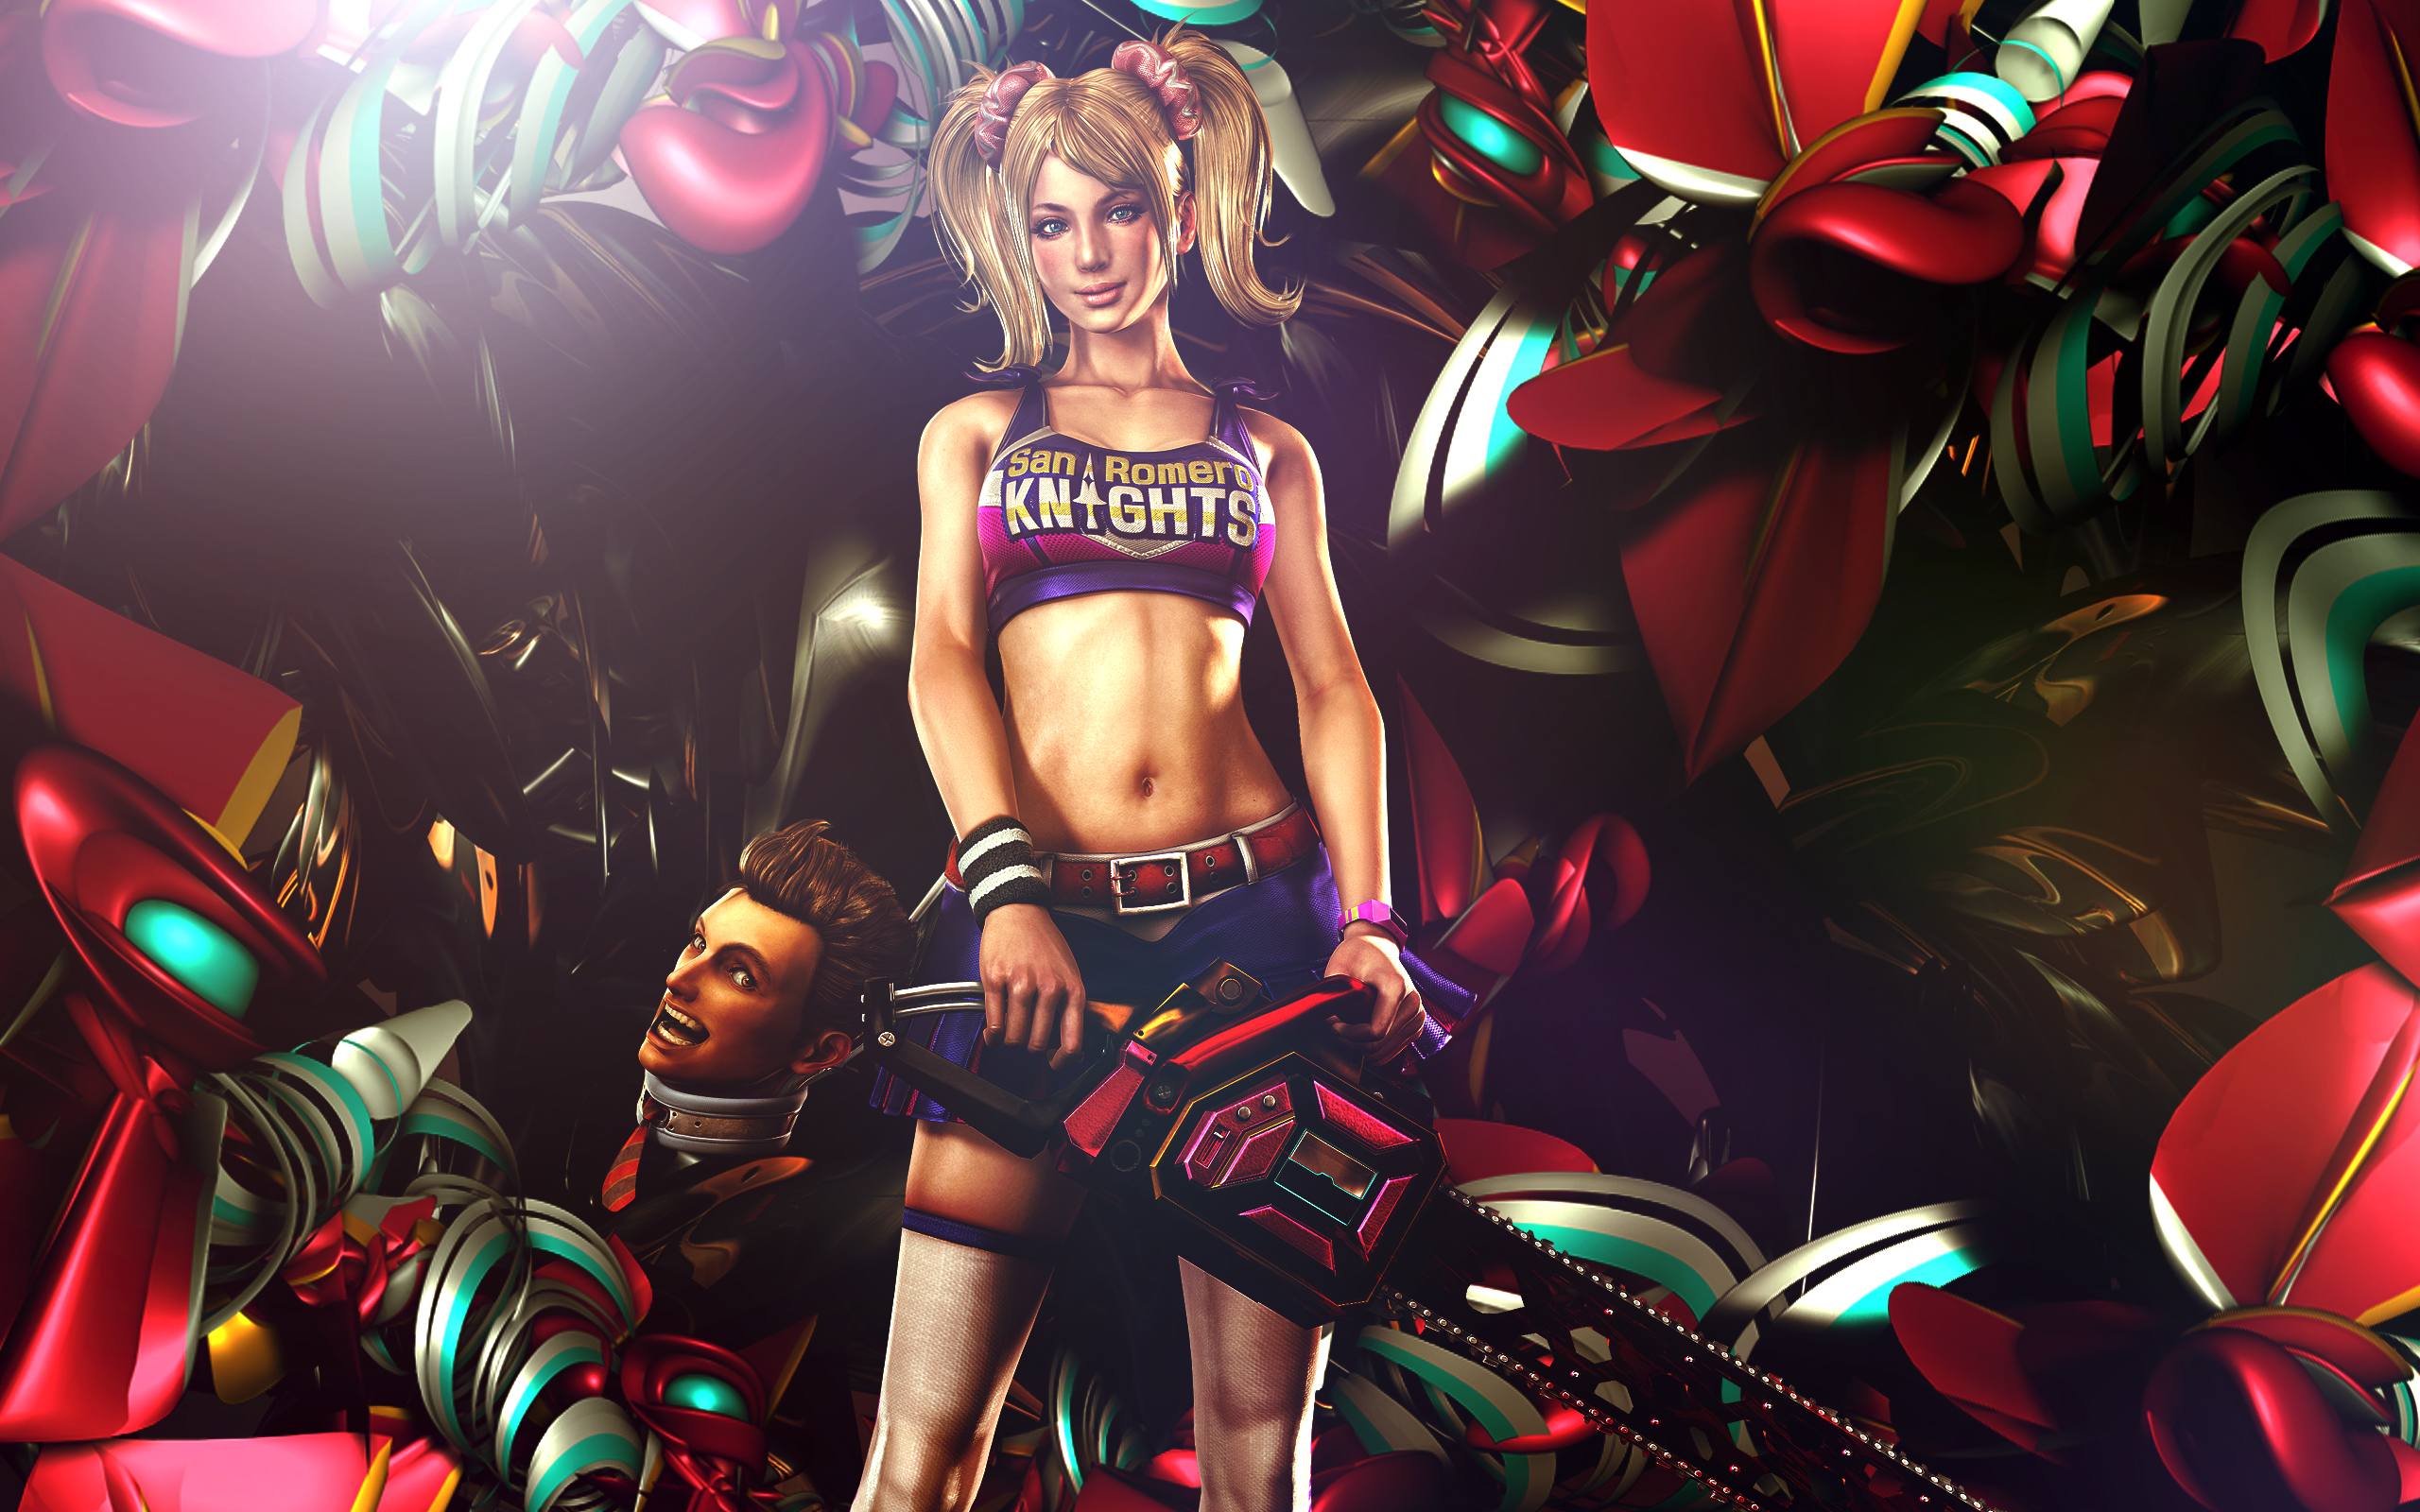 Download wallpaper chainsaw, Lollipop Chainsaw, Juliet Starling, Nick,  Grasshopper Manufacture, section games in resolution 1024x600